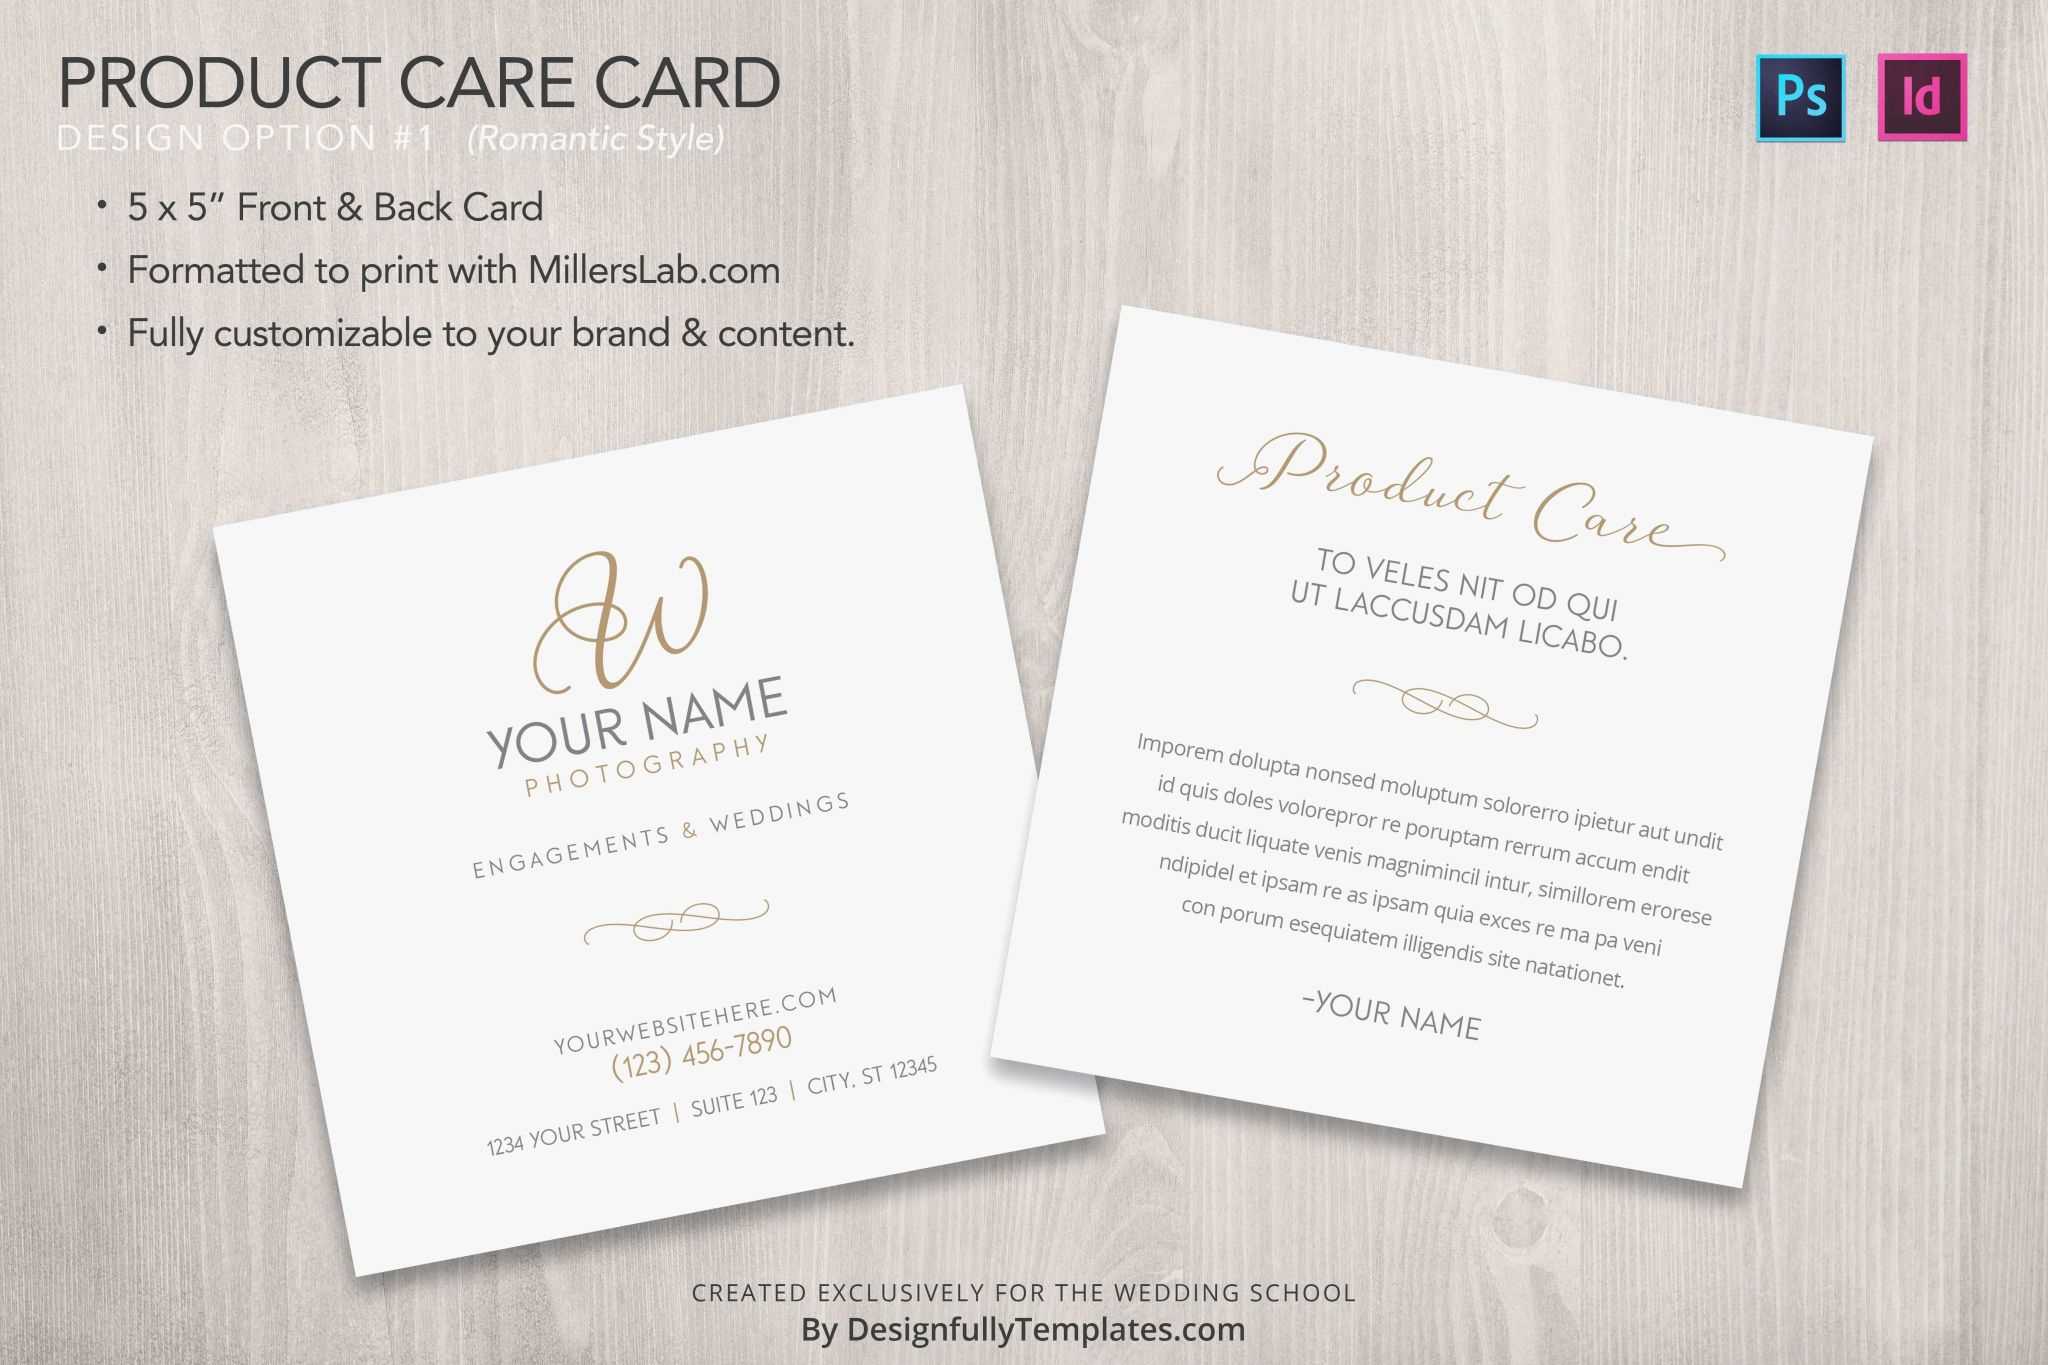 Free Place Card Templates 6 Per Page - Atlantaauctionco Throughout Place Card Template Free 6 Per Page